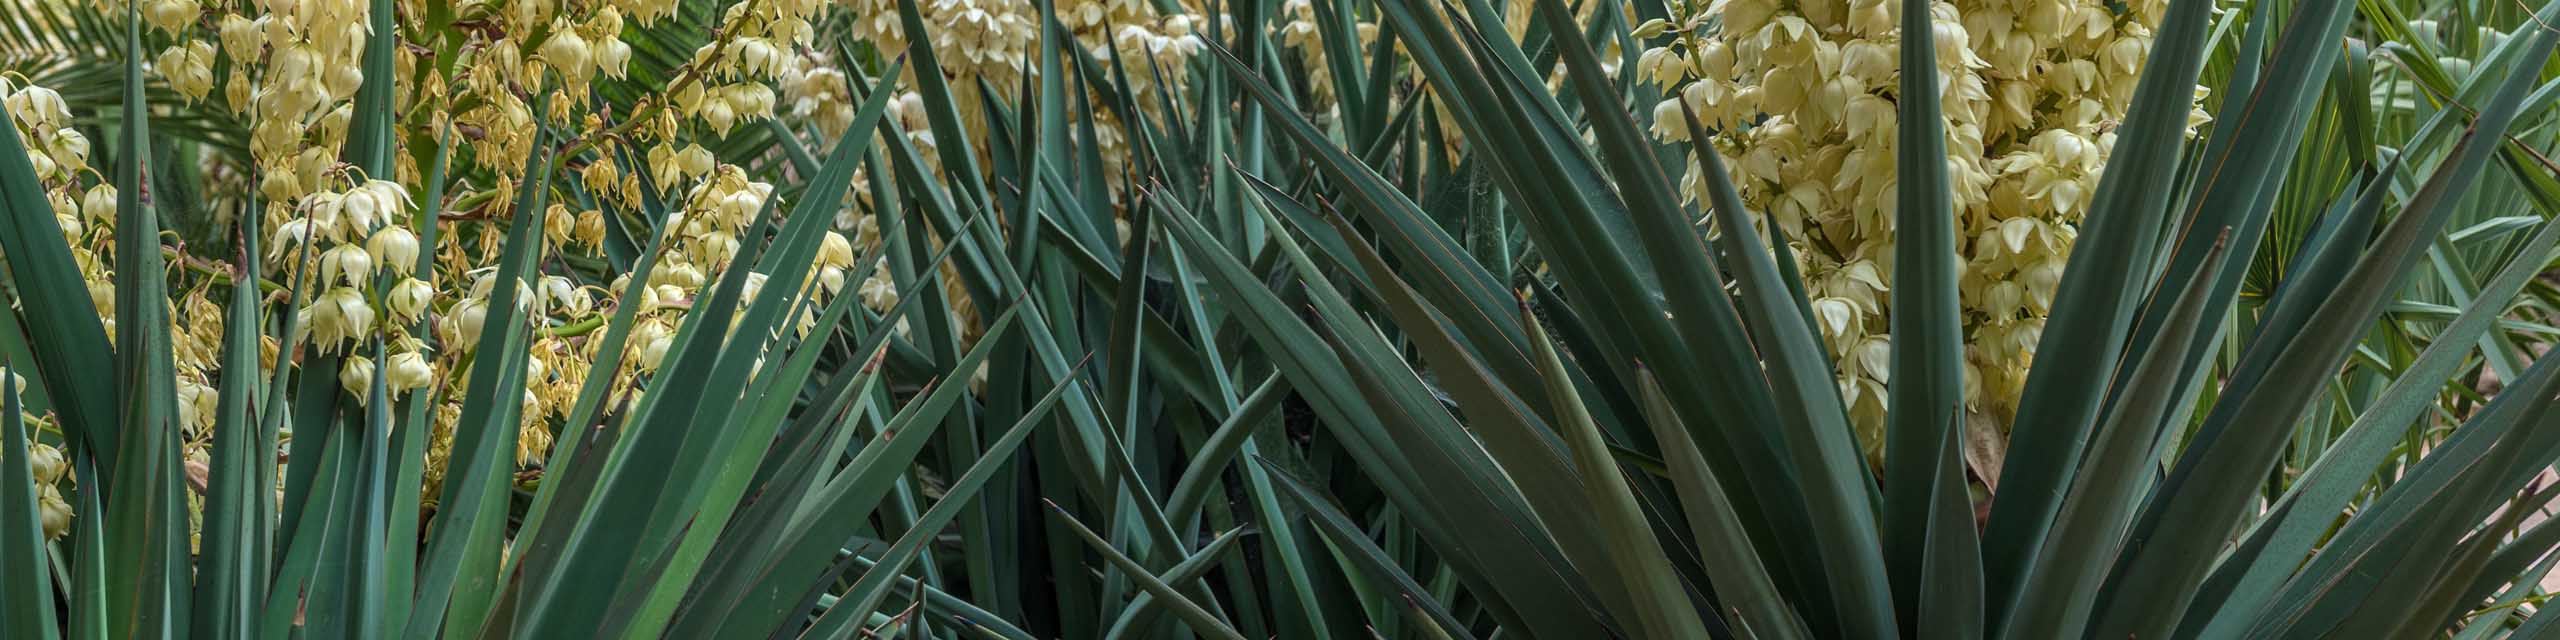 Close up of Yucca Gloriosa plants with flower stalks and white blossoms.